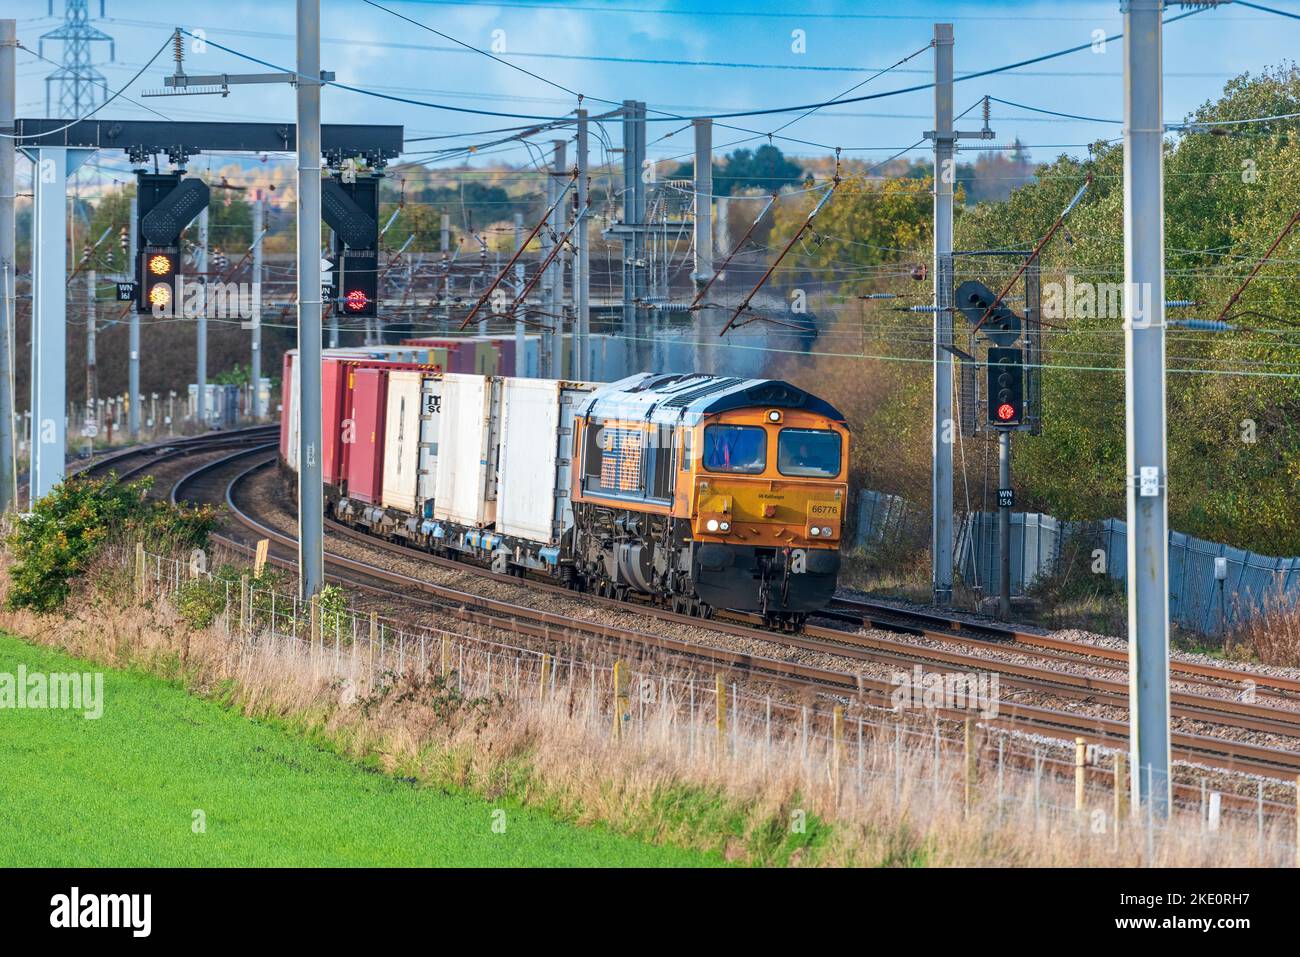 Class 66 diesel electric fright locomotive named Joanee of GBRF hauling freight at Winwick. Stock Photo